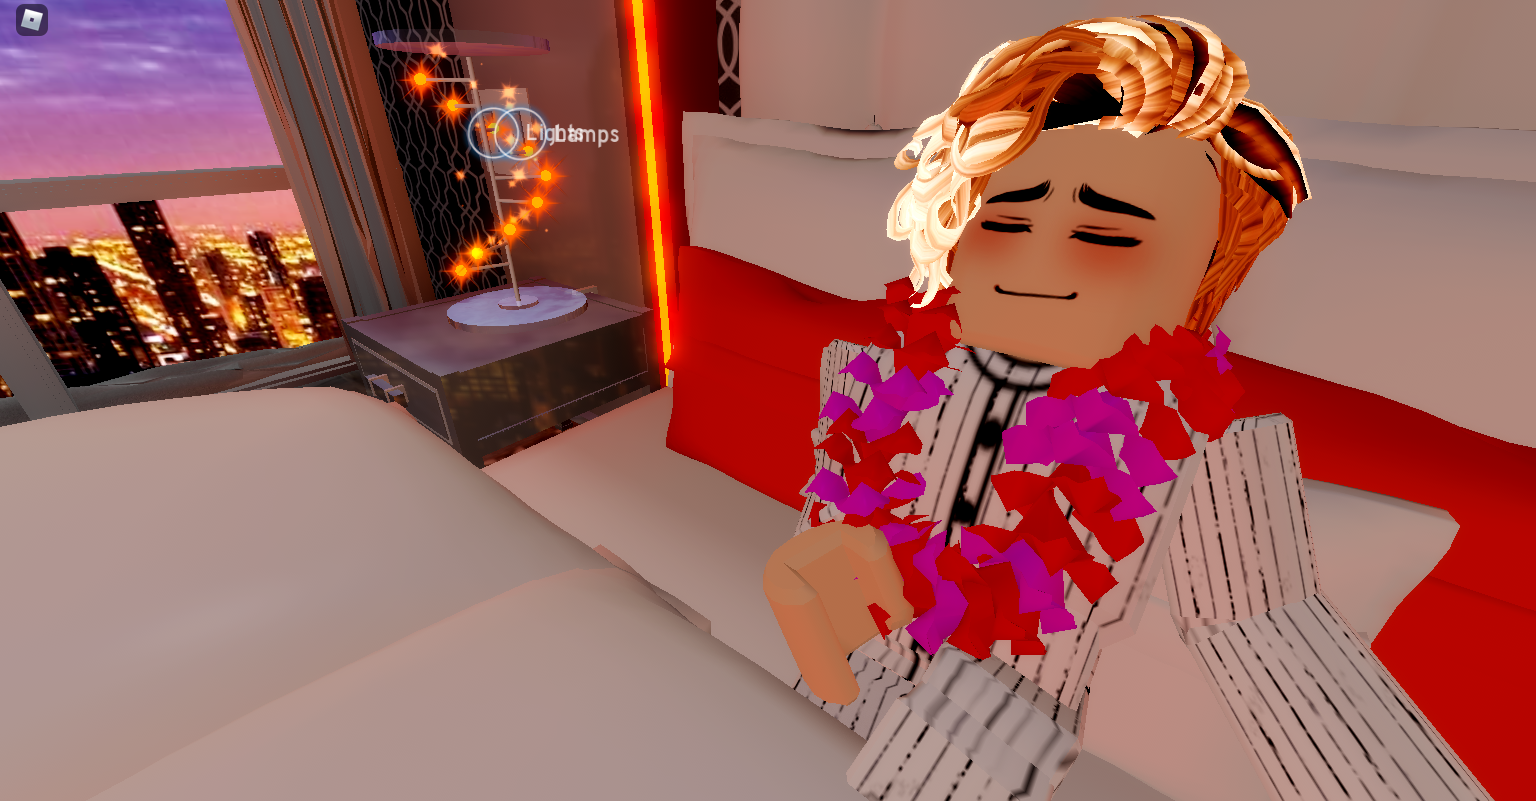 Qi2d6erfuq5ldm - new thigh high boots and wings are here roblox royale high school winter update